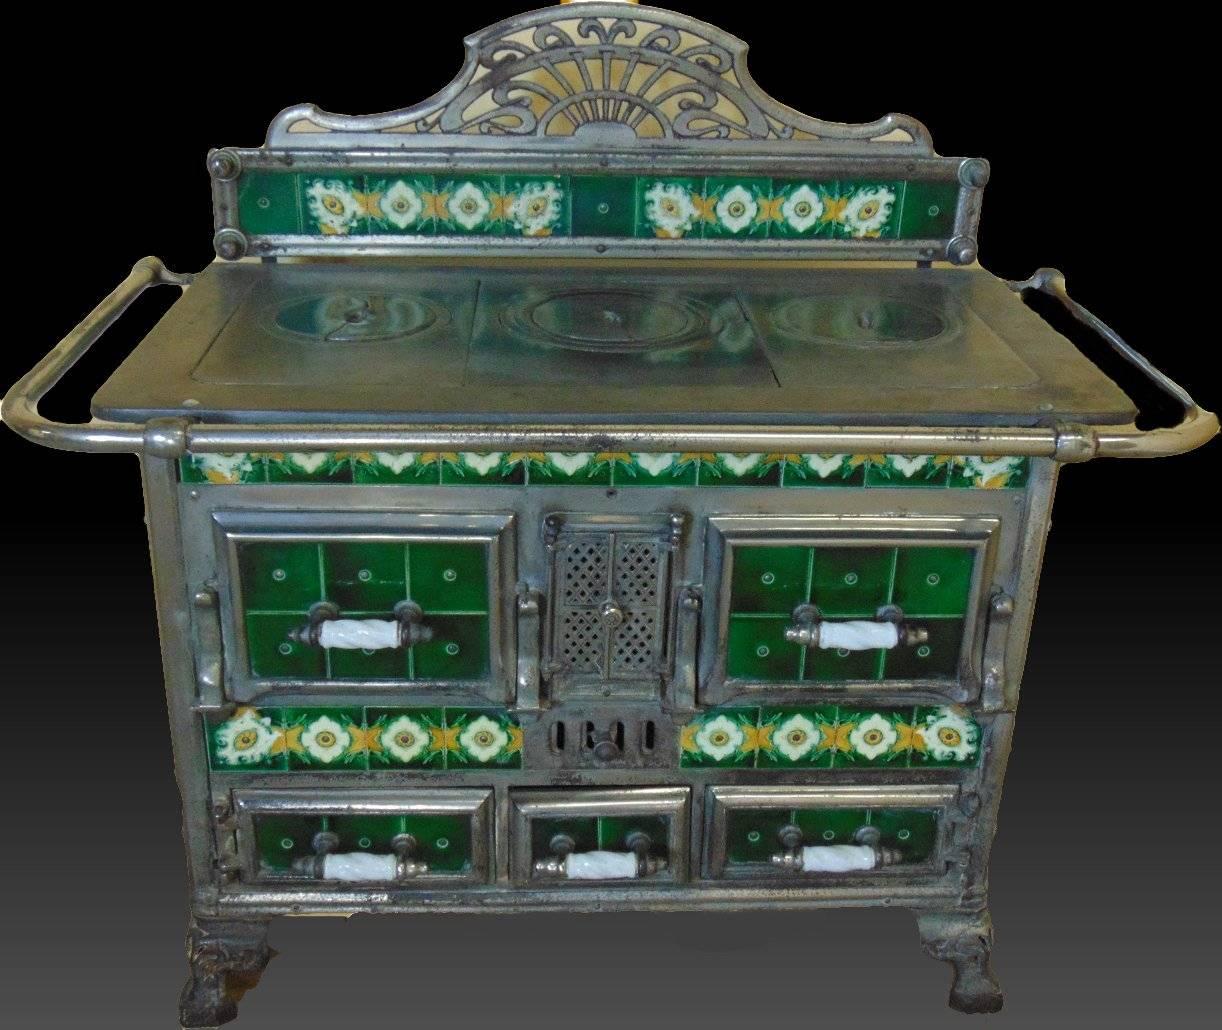 A stunning all original coal fired range cooker from France made by SDP Model No11. circa 1900 this highly decorative range retains its original coal scuttle. Both the range and the scuttle have 100% undamaged Faience tiles the metal work is also